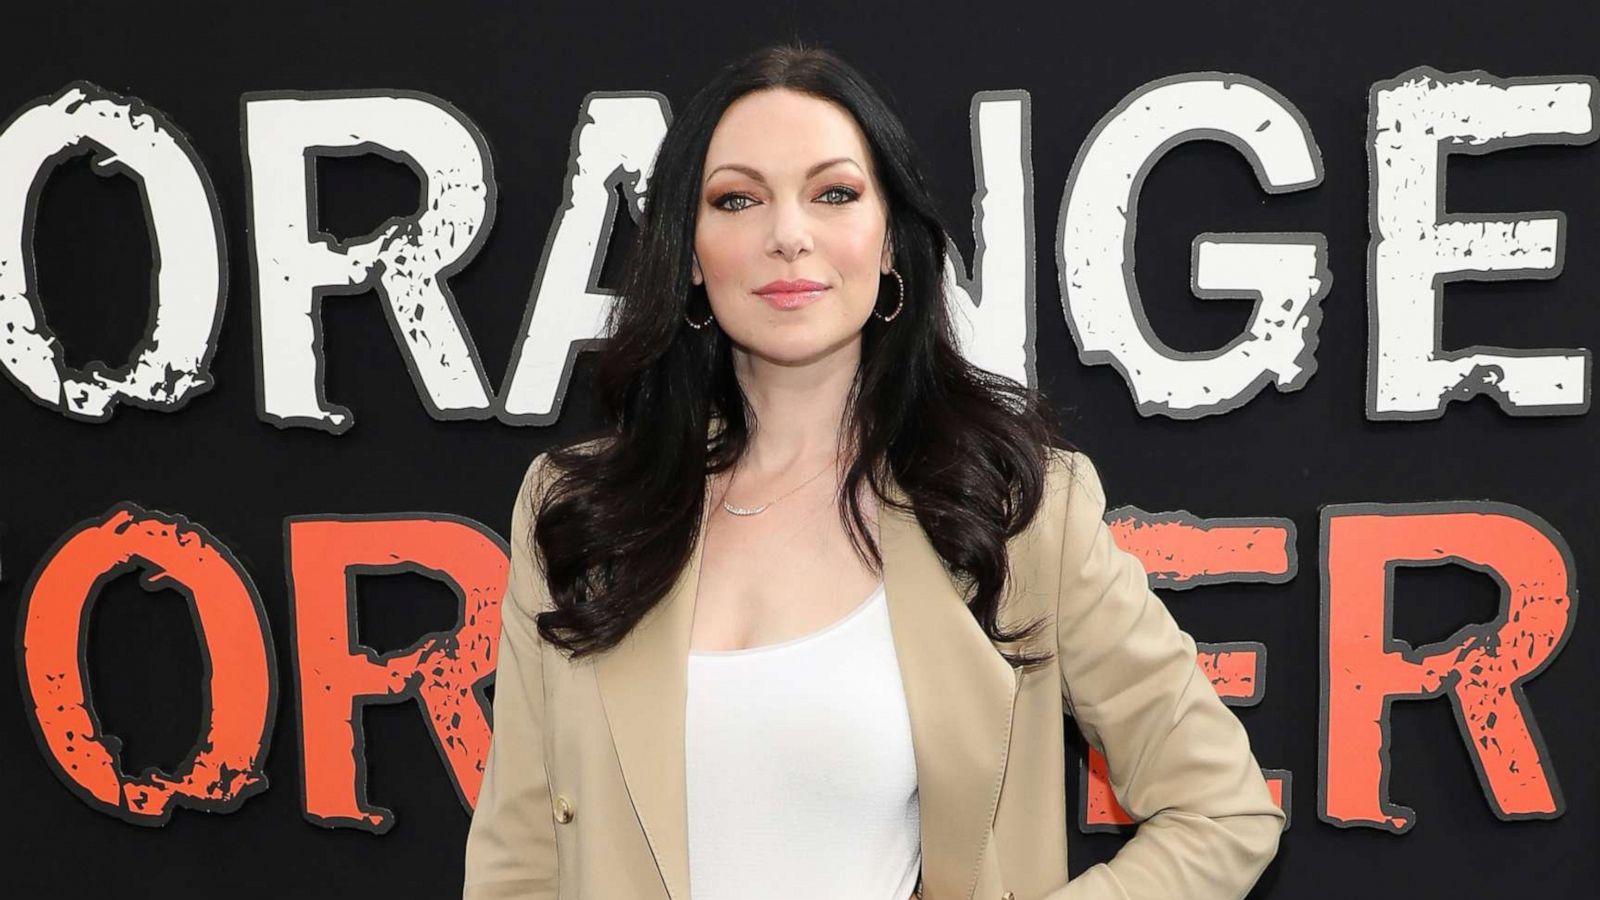 That 70s Show star Laura Prepon reveals she is no longer practicing Scientology